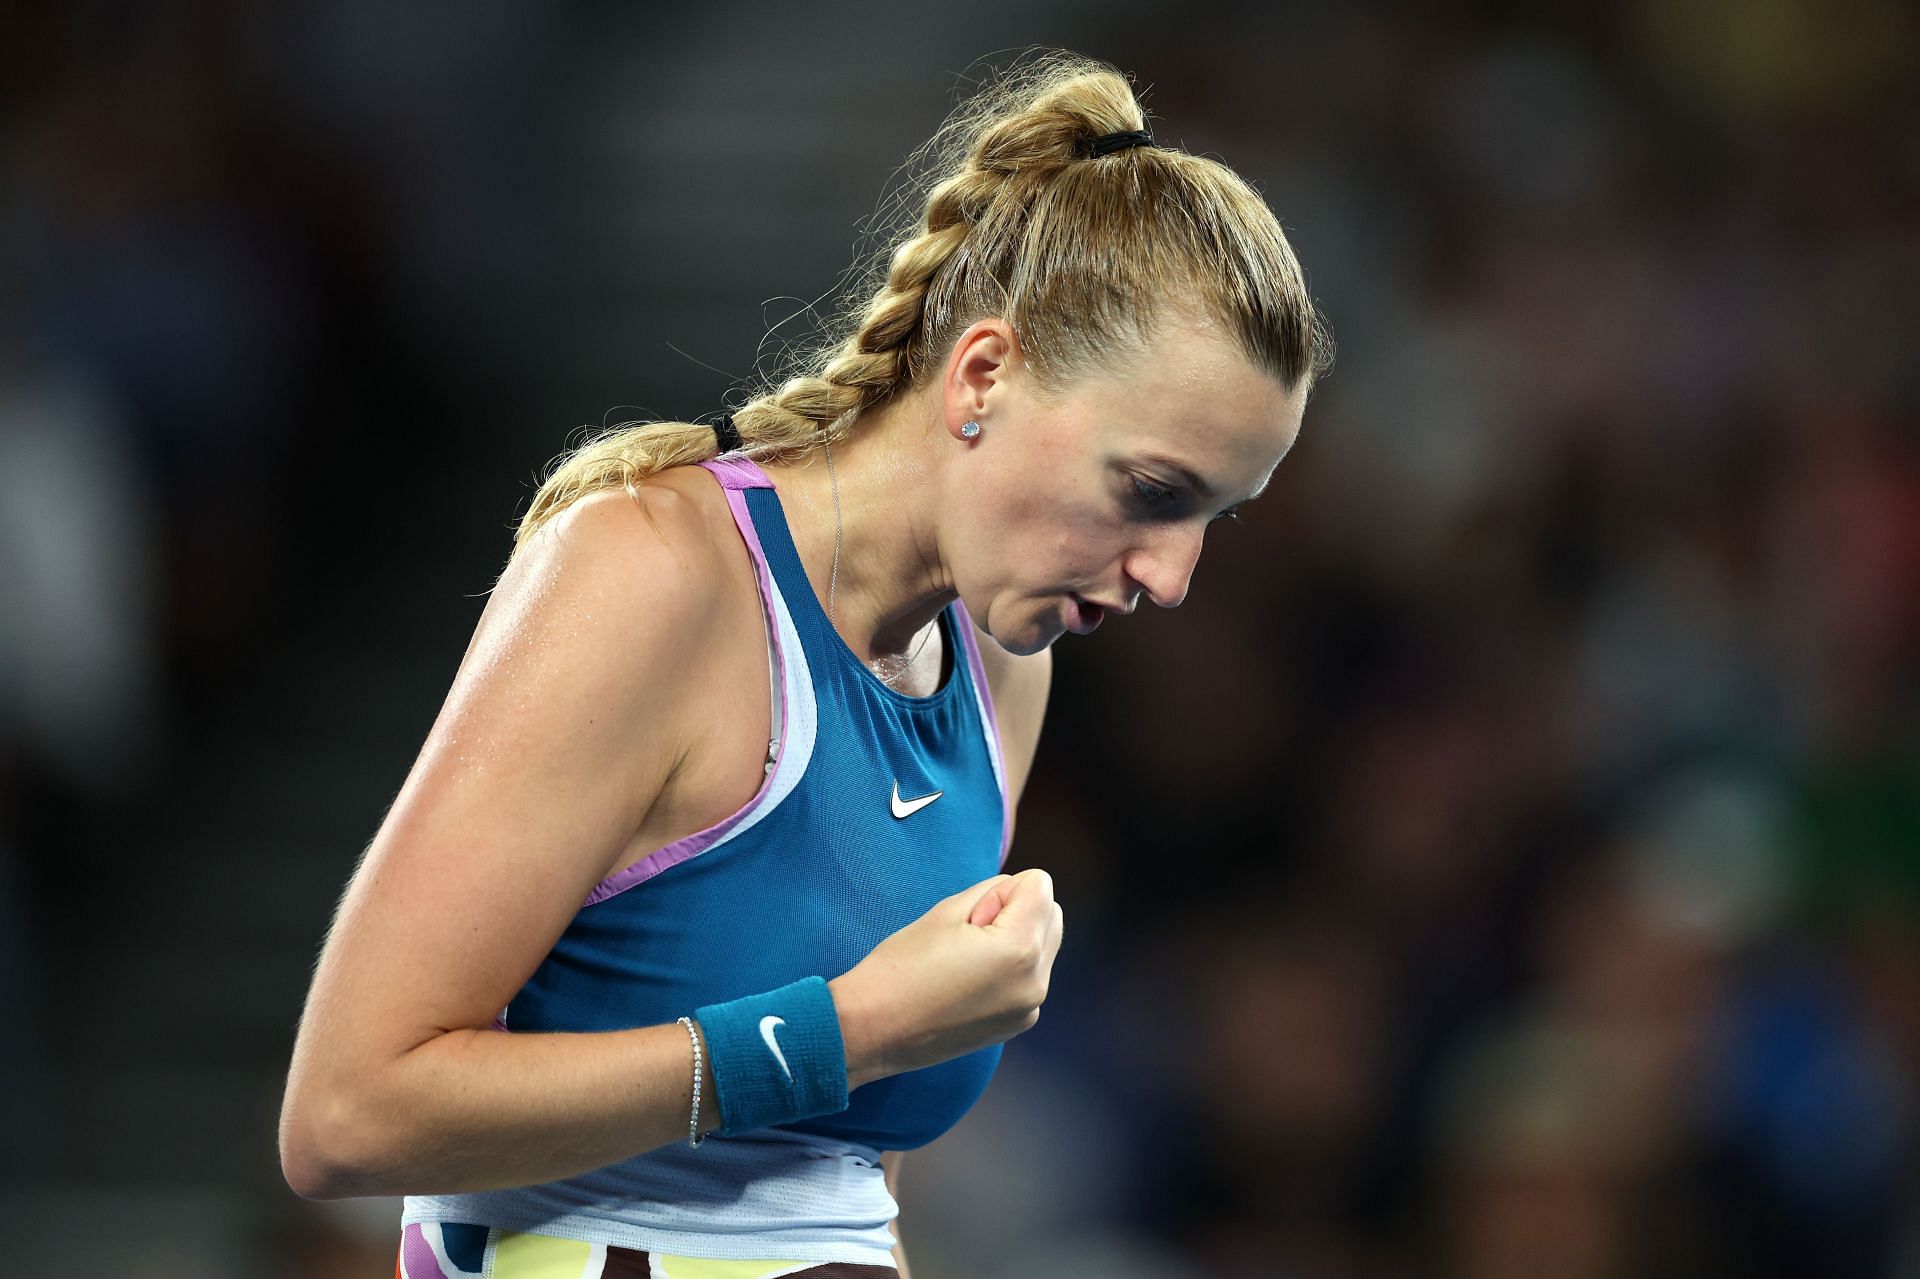 Petra Kvitova has the most match wins for a player in Doha.